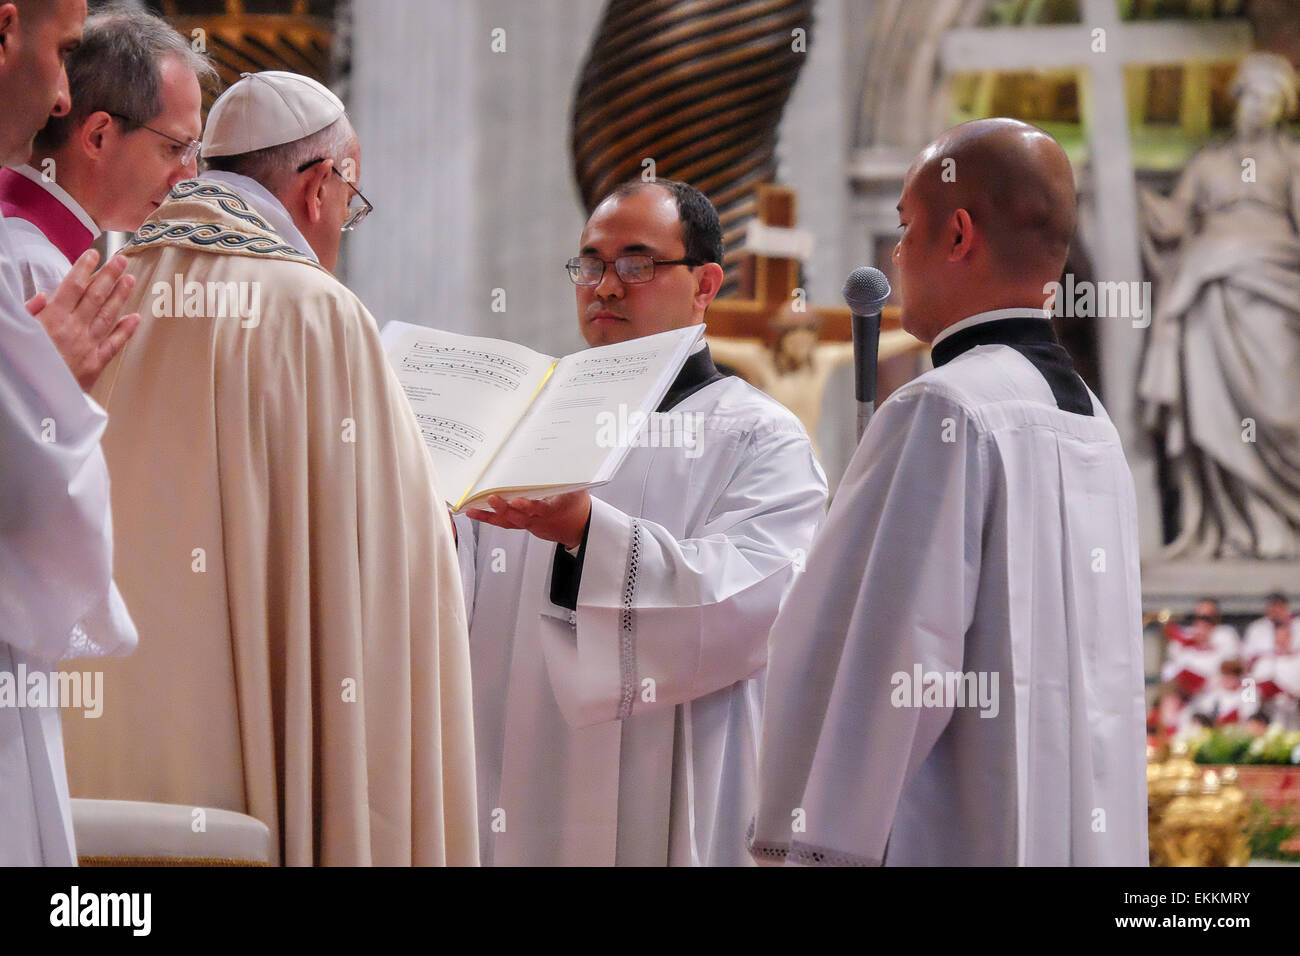 St. Peter`s Basilica, Vatican City. 11th April, 2015. Pope Francis Ceremony publication Papal Bull Holy Year of Mercy Credit:  Realy Easy Star/Alamy Live News Stock Photo